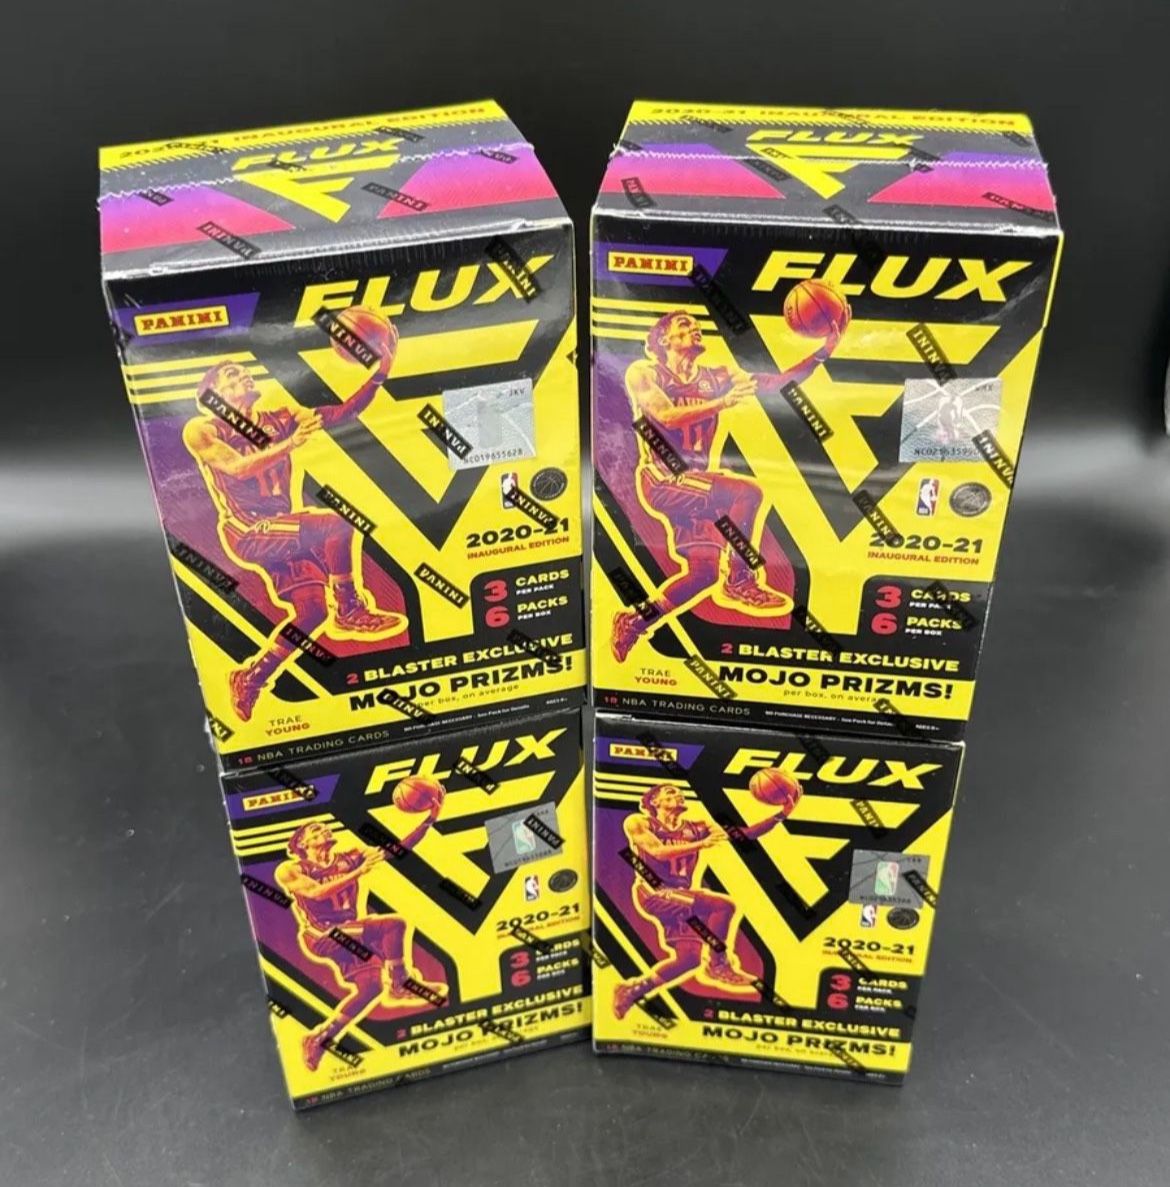 Wow Great Price 2021-22 Flux Blaster Box Sold In Stores For $34.98+tax My Price $26 Or 2/$50 Firm 